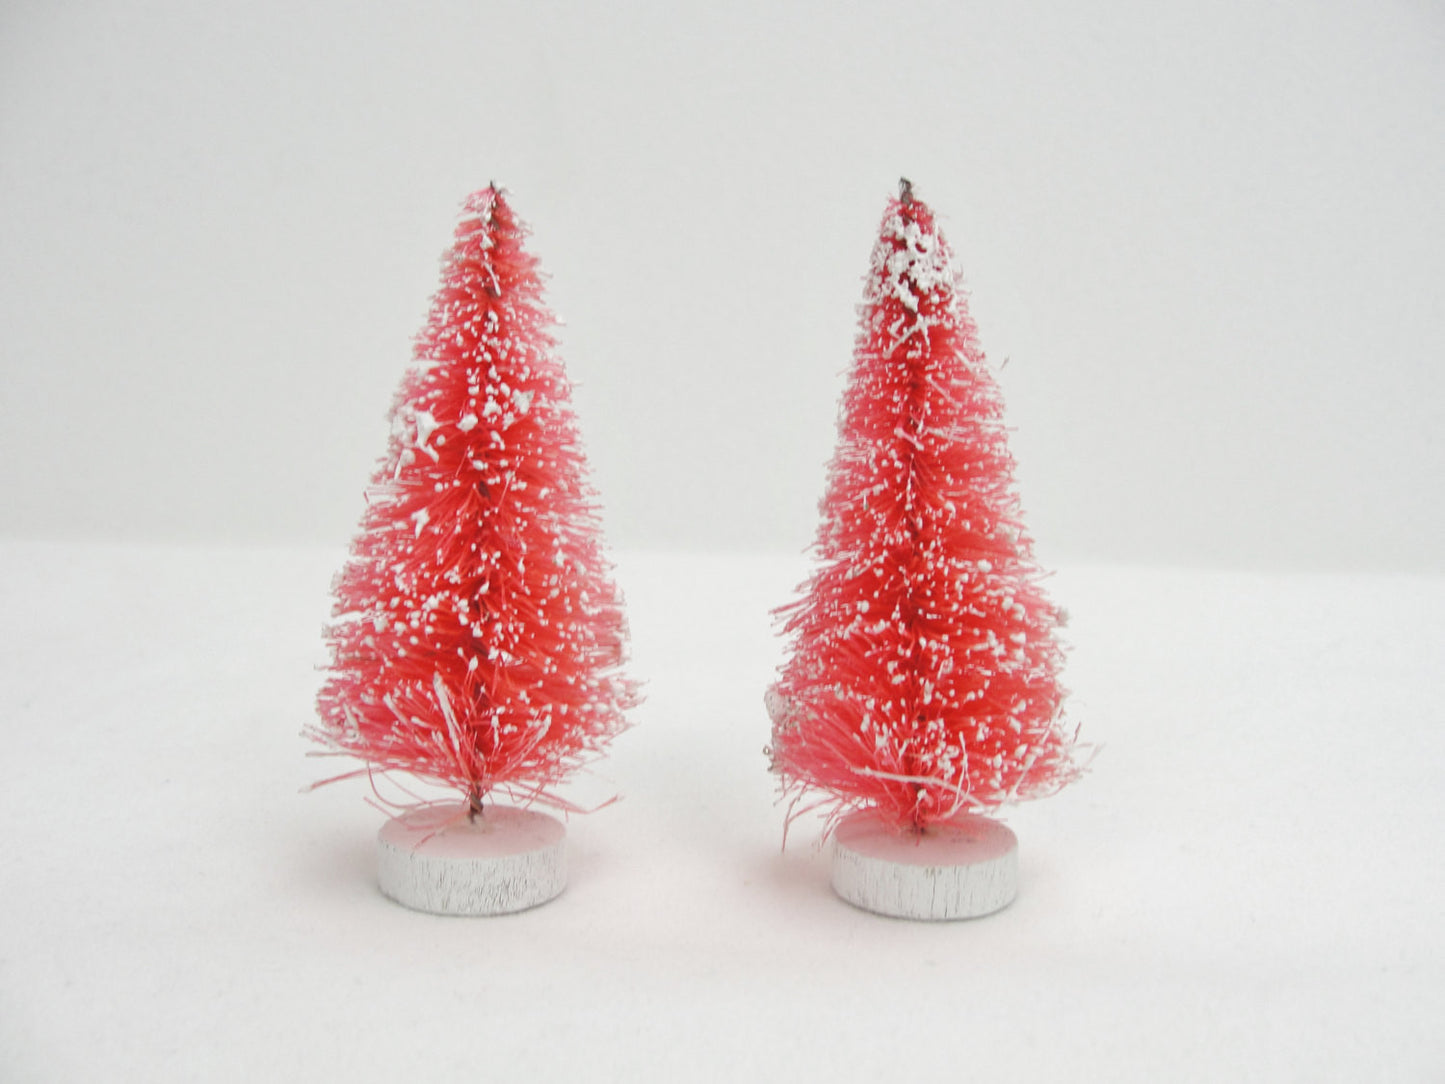 Frosted Pink bottle brush sisal trees 3" tall set of 2 - General Crafts - Craft Supply House